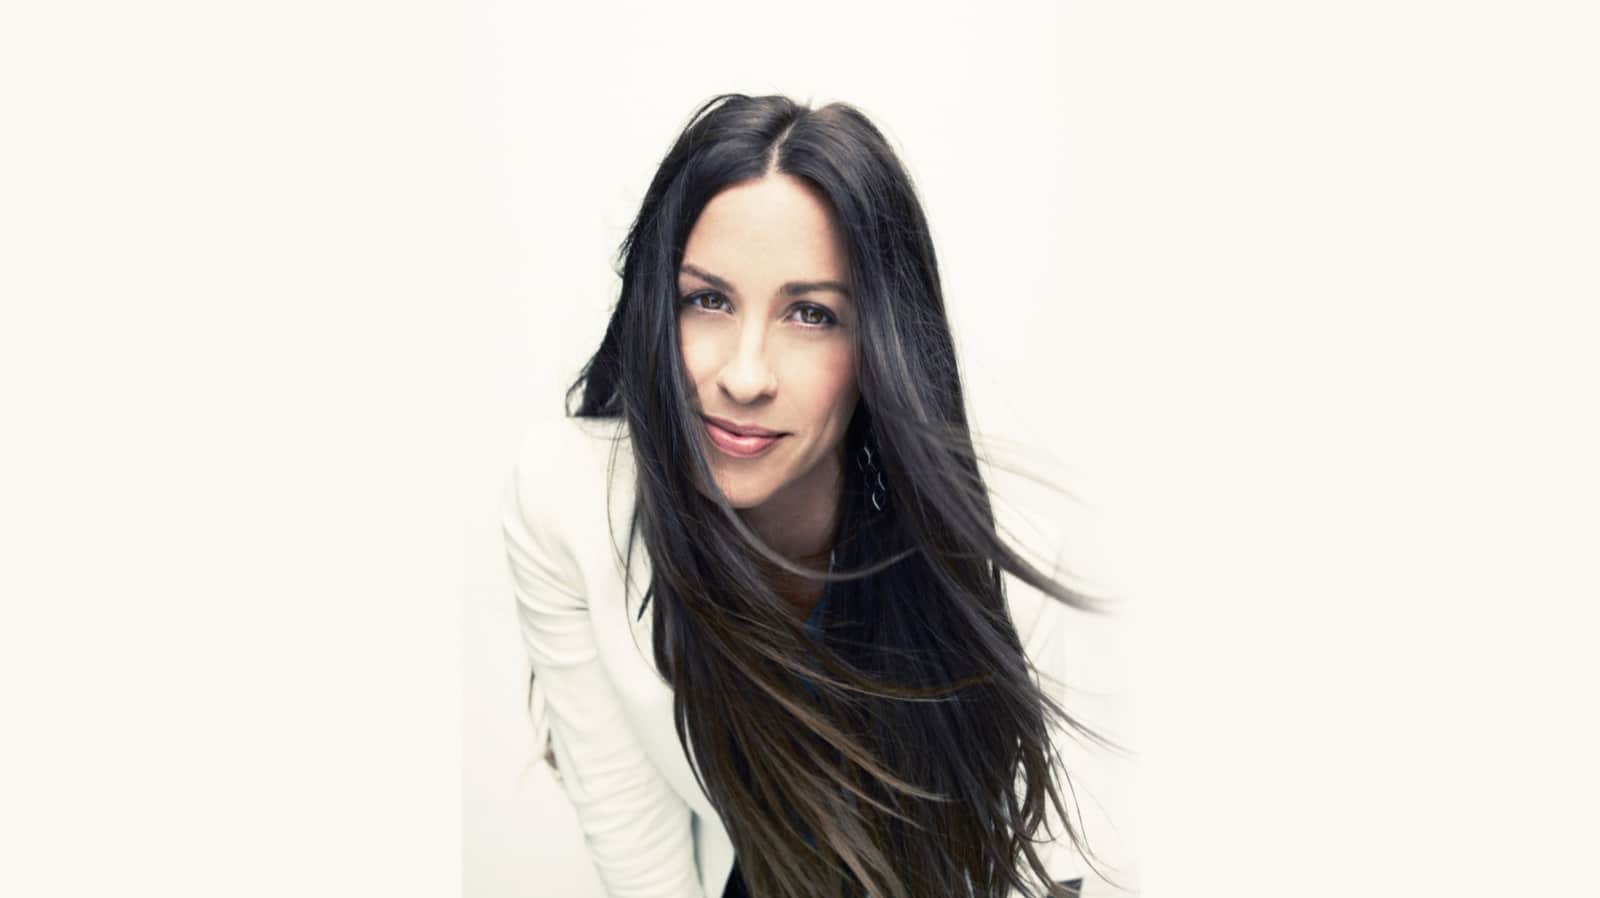 Alanis Morissette at Ruoff Music Center Tickets